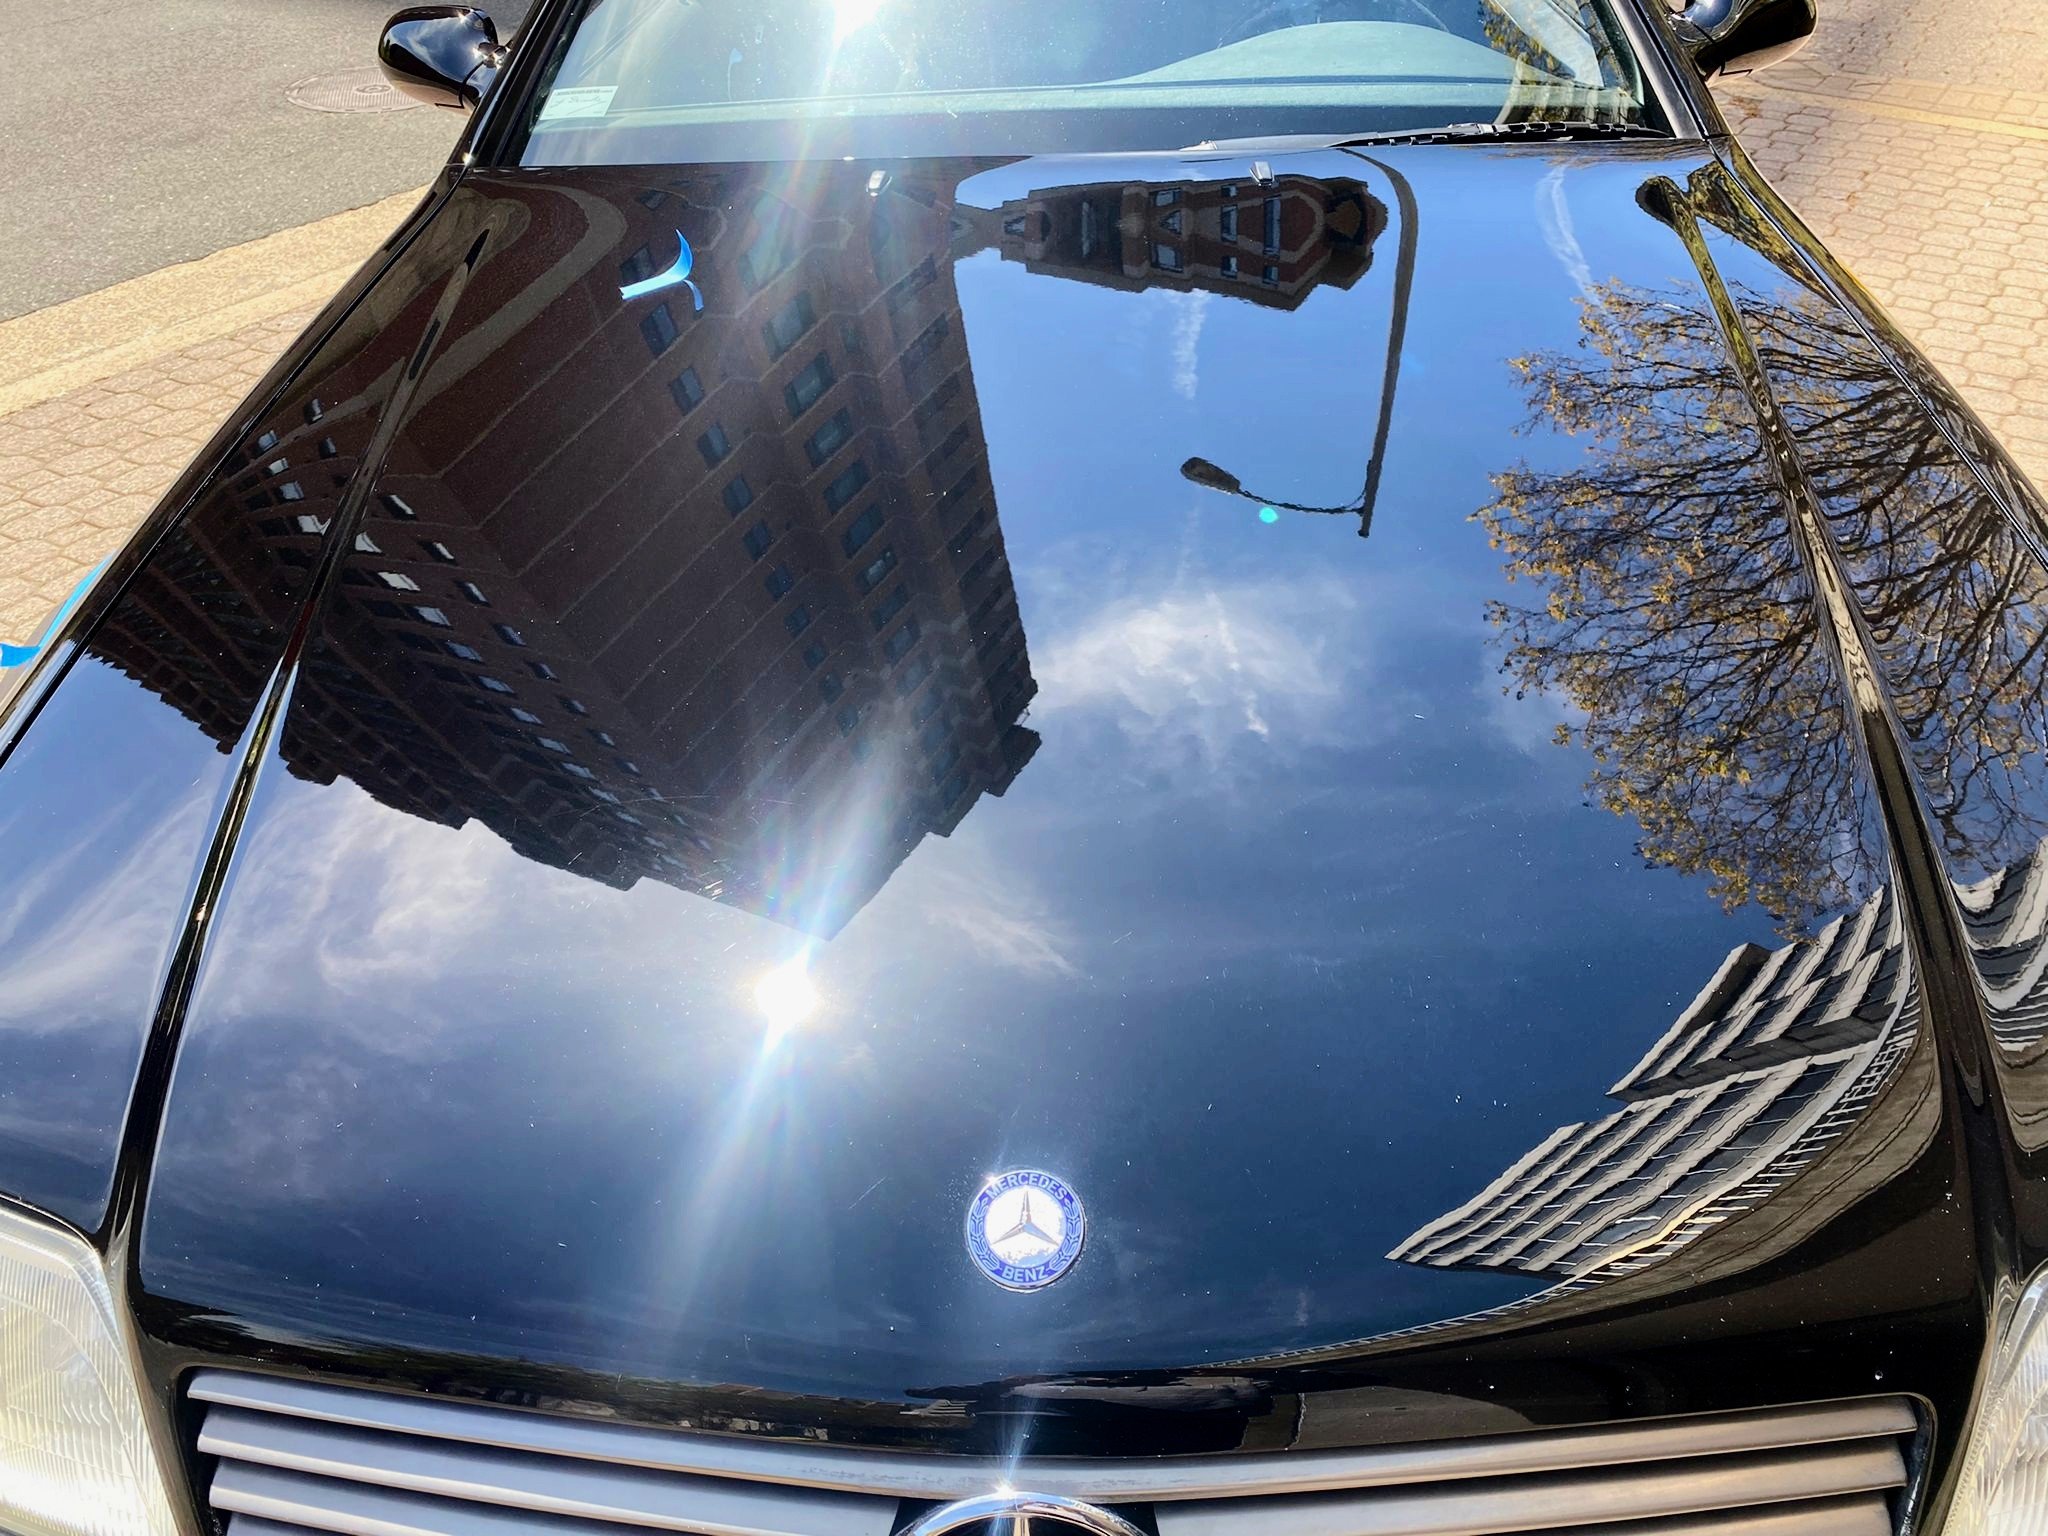 Does Your Car Have RIDS? How To Fix Random Isolated Deep Scratches —  Capitol Shine Washington DC Paint Protection Film and Ceramic Coatings